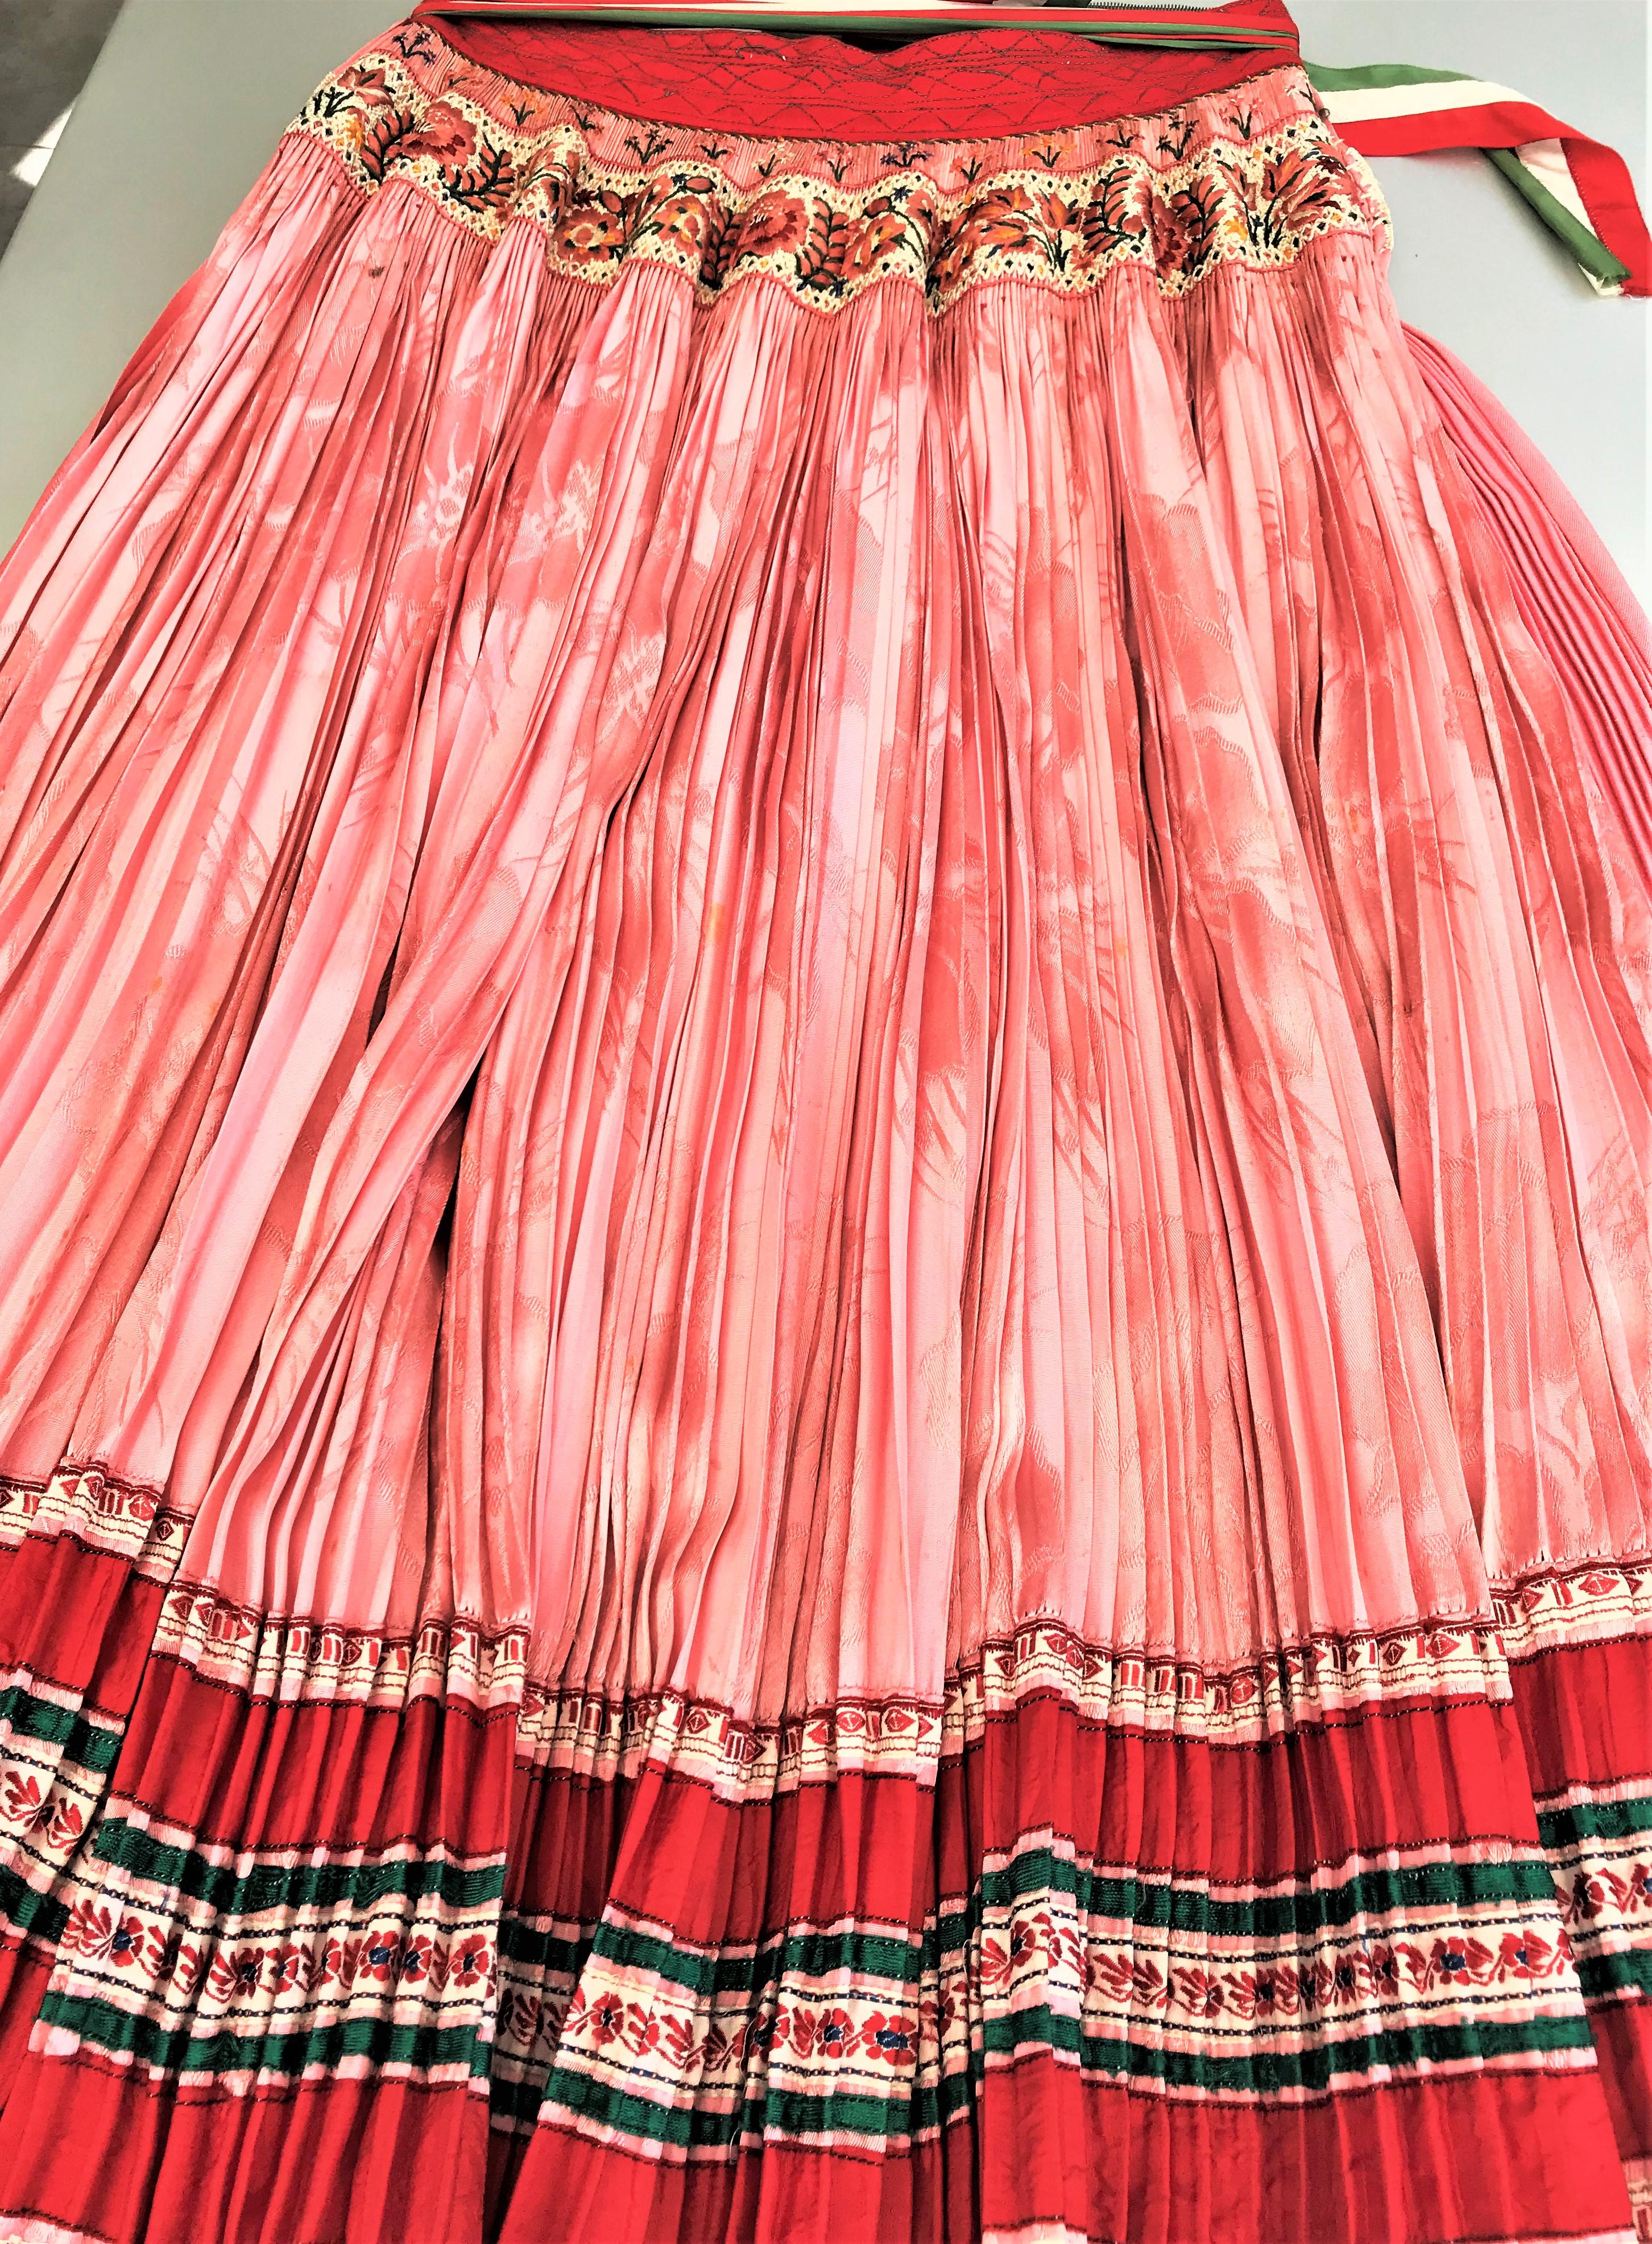 Jó napot kivanok!
A beautiful pleated skirt in pink with a hand-embroidered border over the hip. -Traditionally, the matching apron is worn over the one-colored front part.
My most beautiful, finely pleated apron with 2 wide hand-embroidered